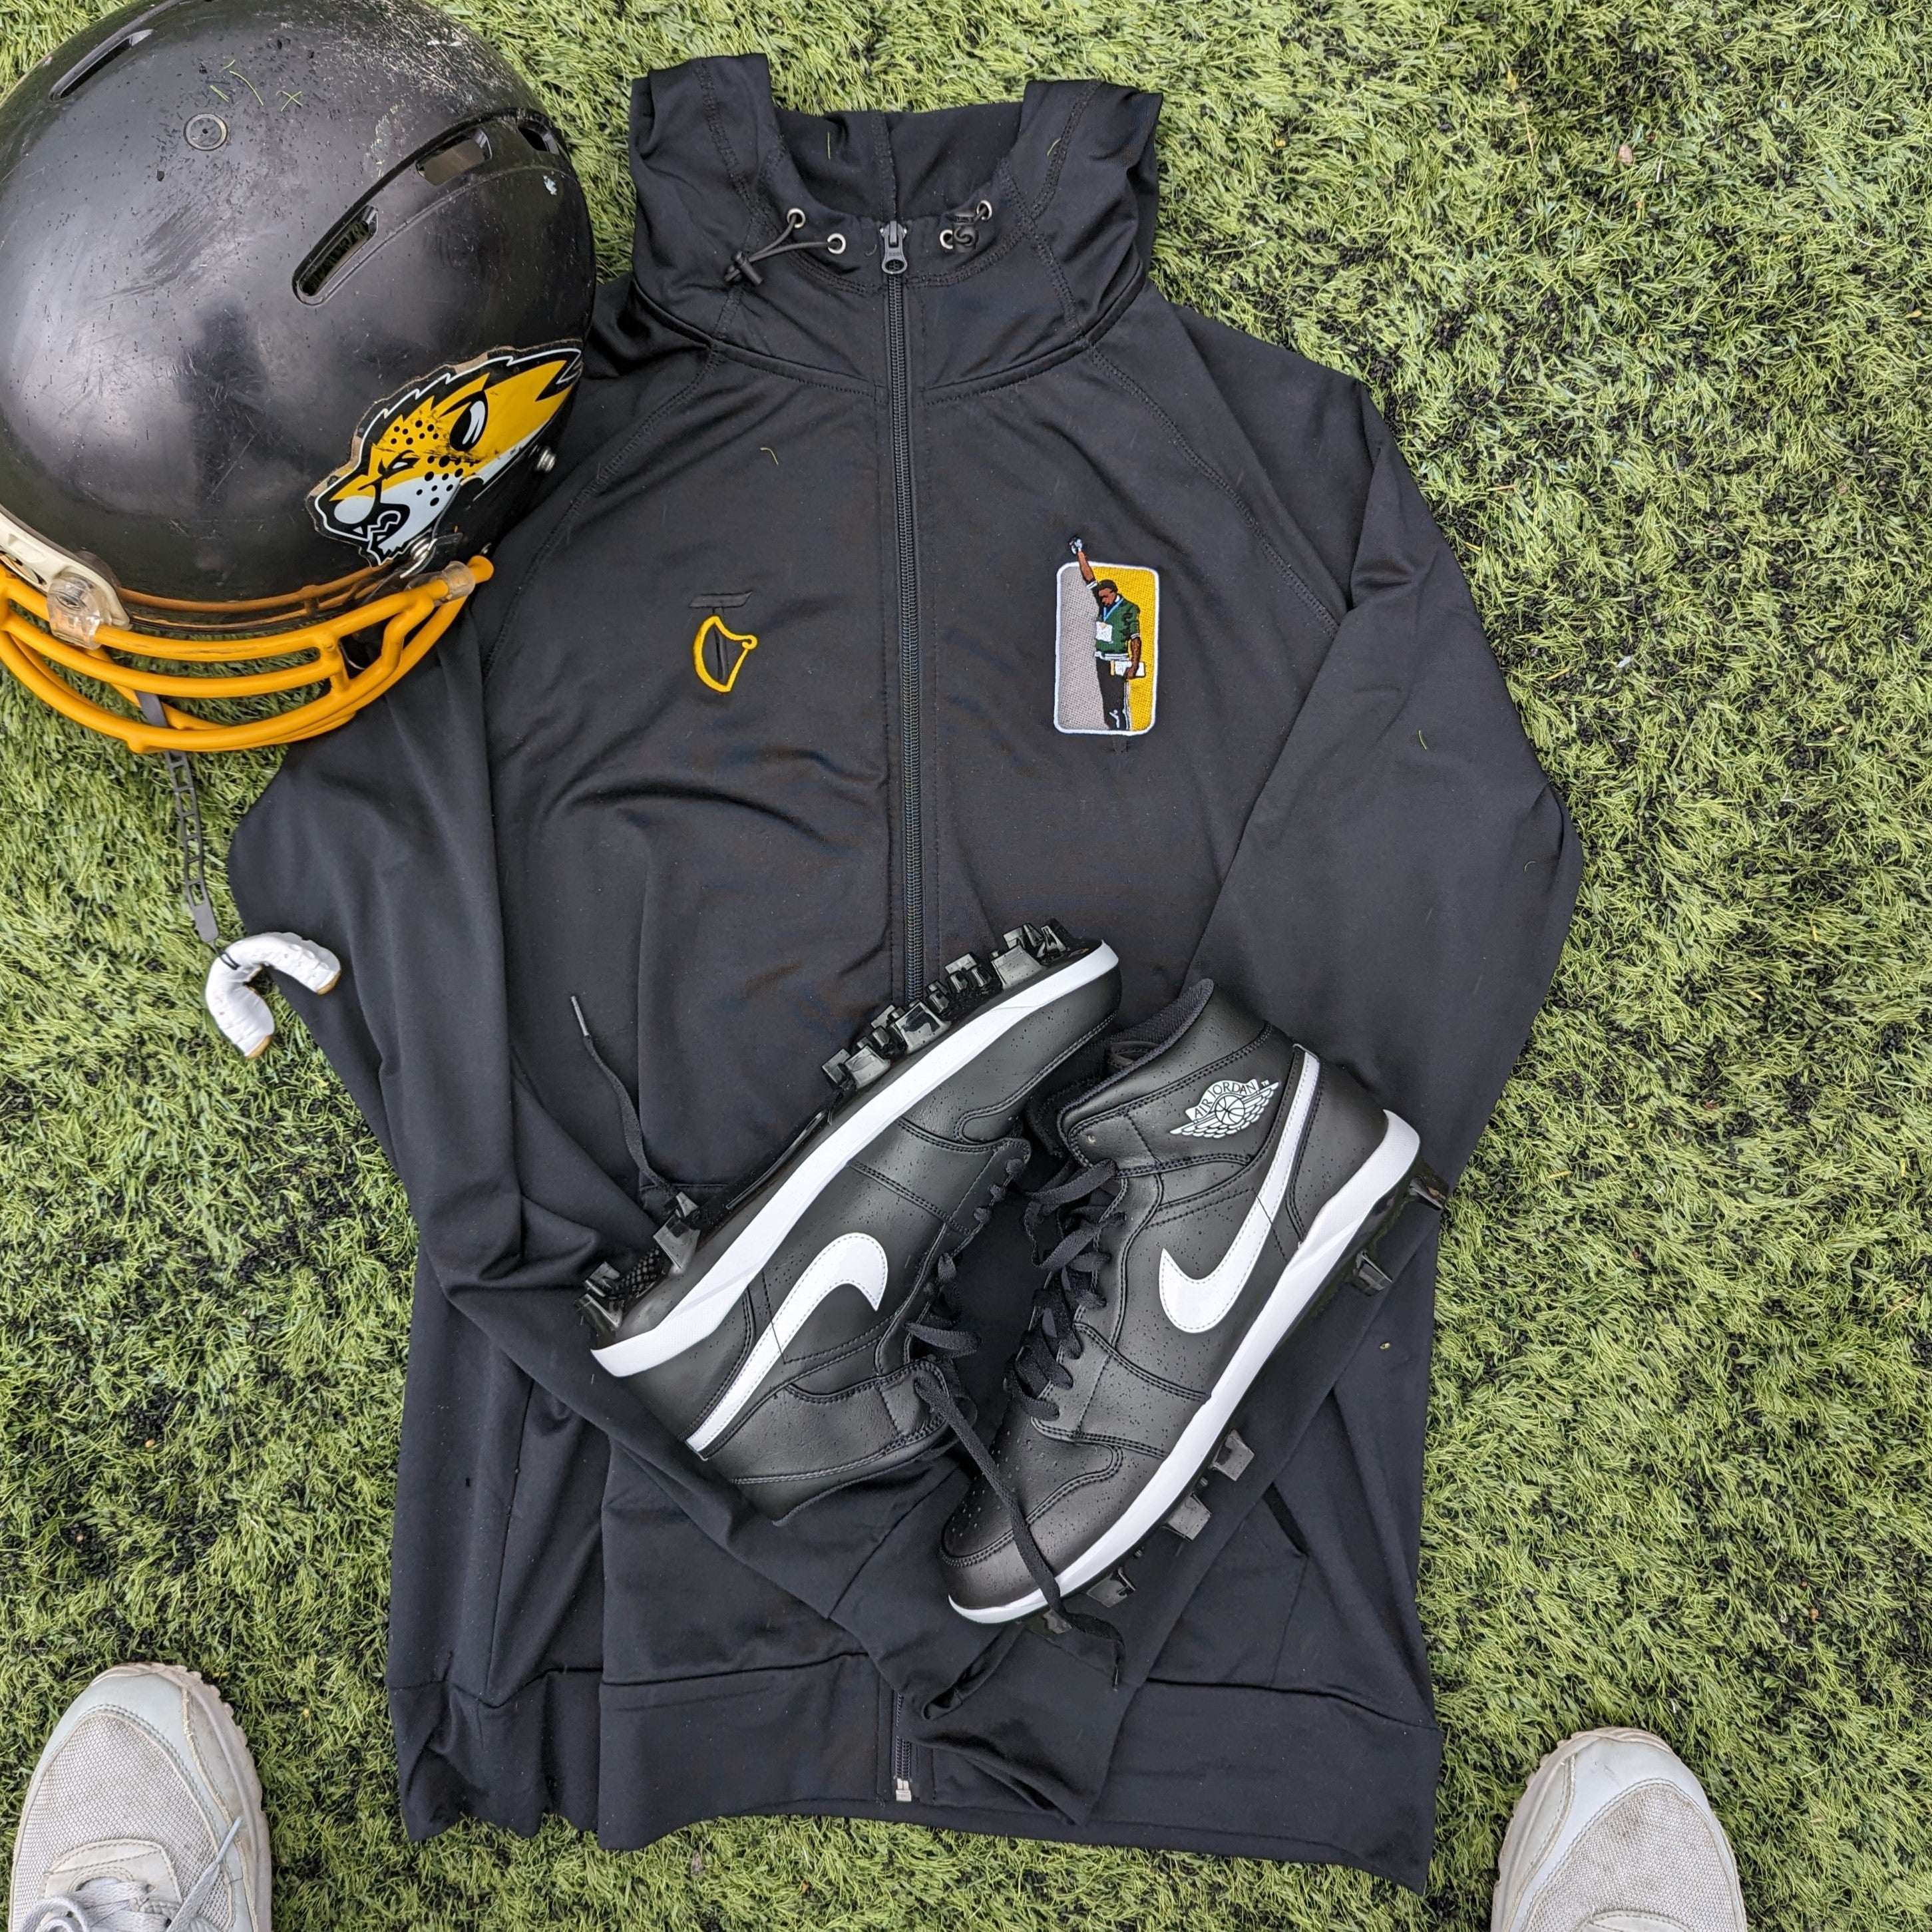 Flatlay image of an athlesuire hoodie with an embroidered design of Tommie Smith raising his black-gloved fists in protest during the 1968 Mexico Olympics Men's 200m medal ceremony. Featuring Jordan 1 Cleats and an American Football helmet with Hertfordshire Cheetah decals